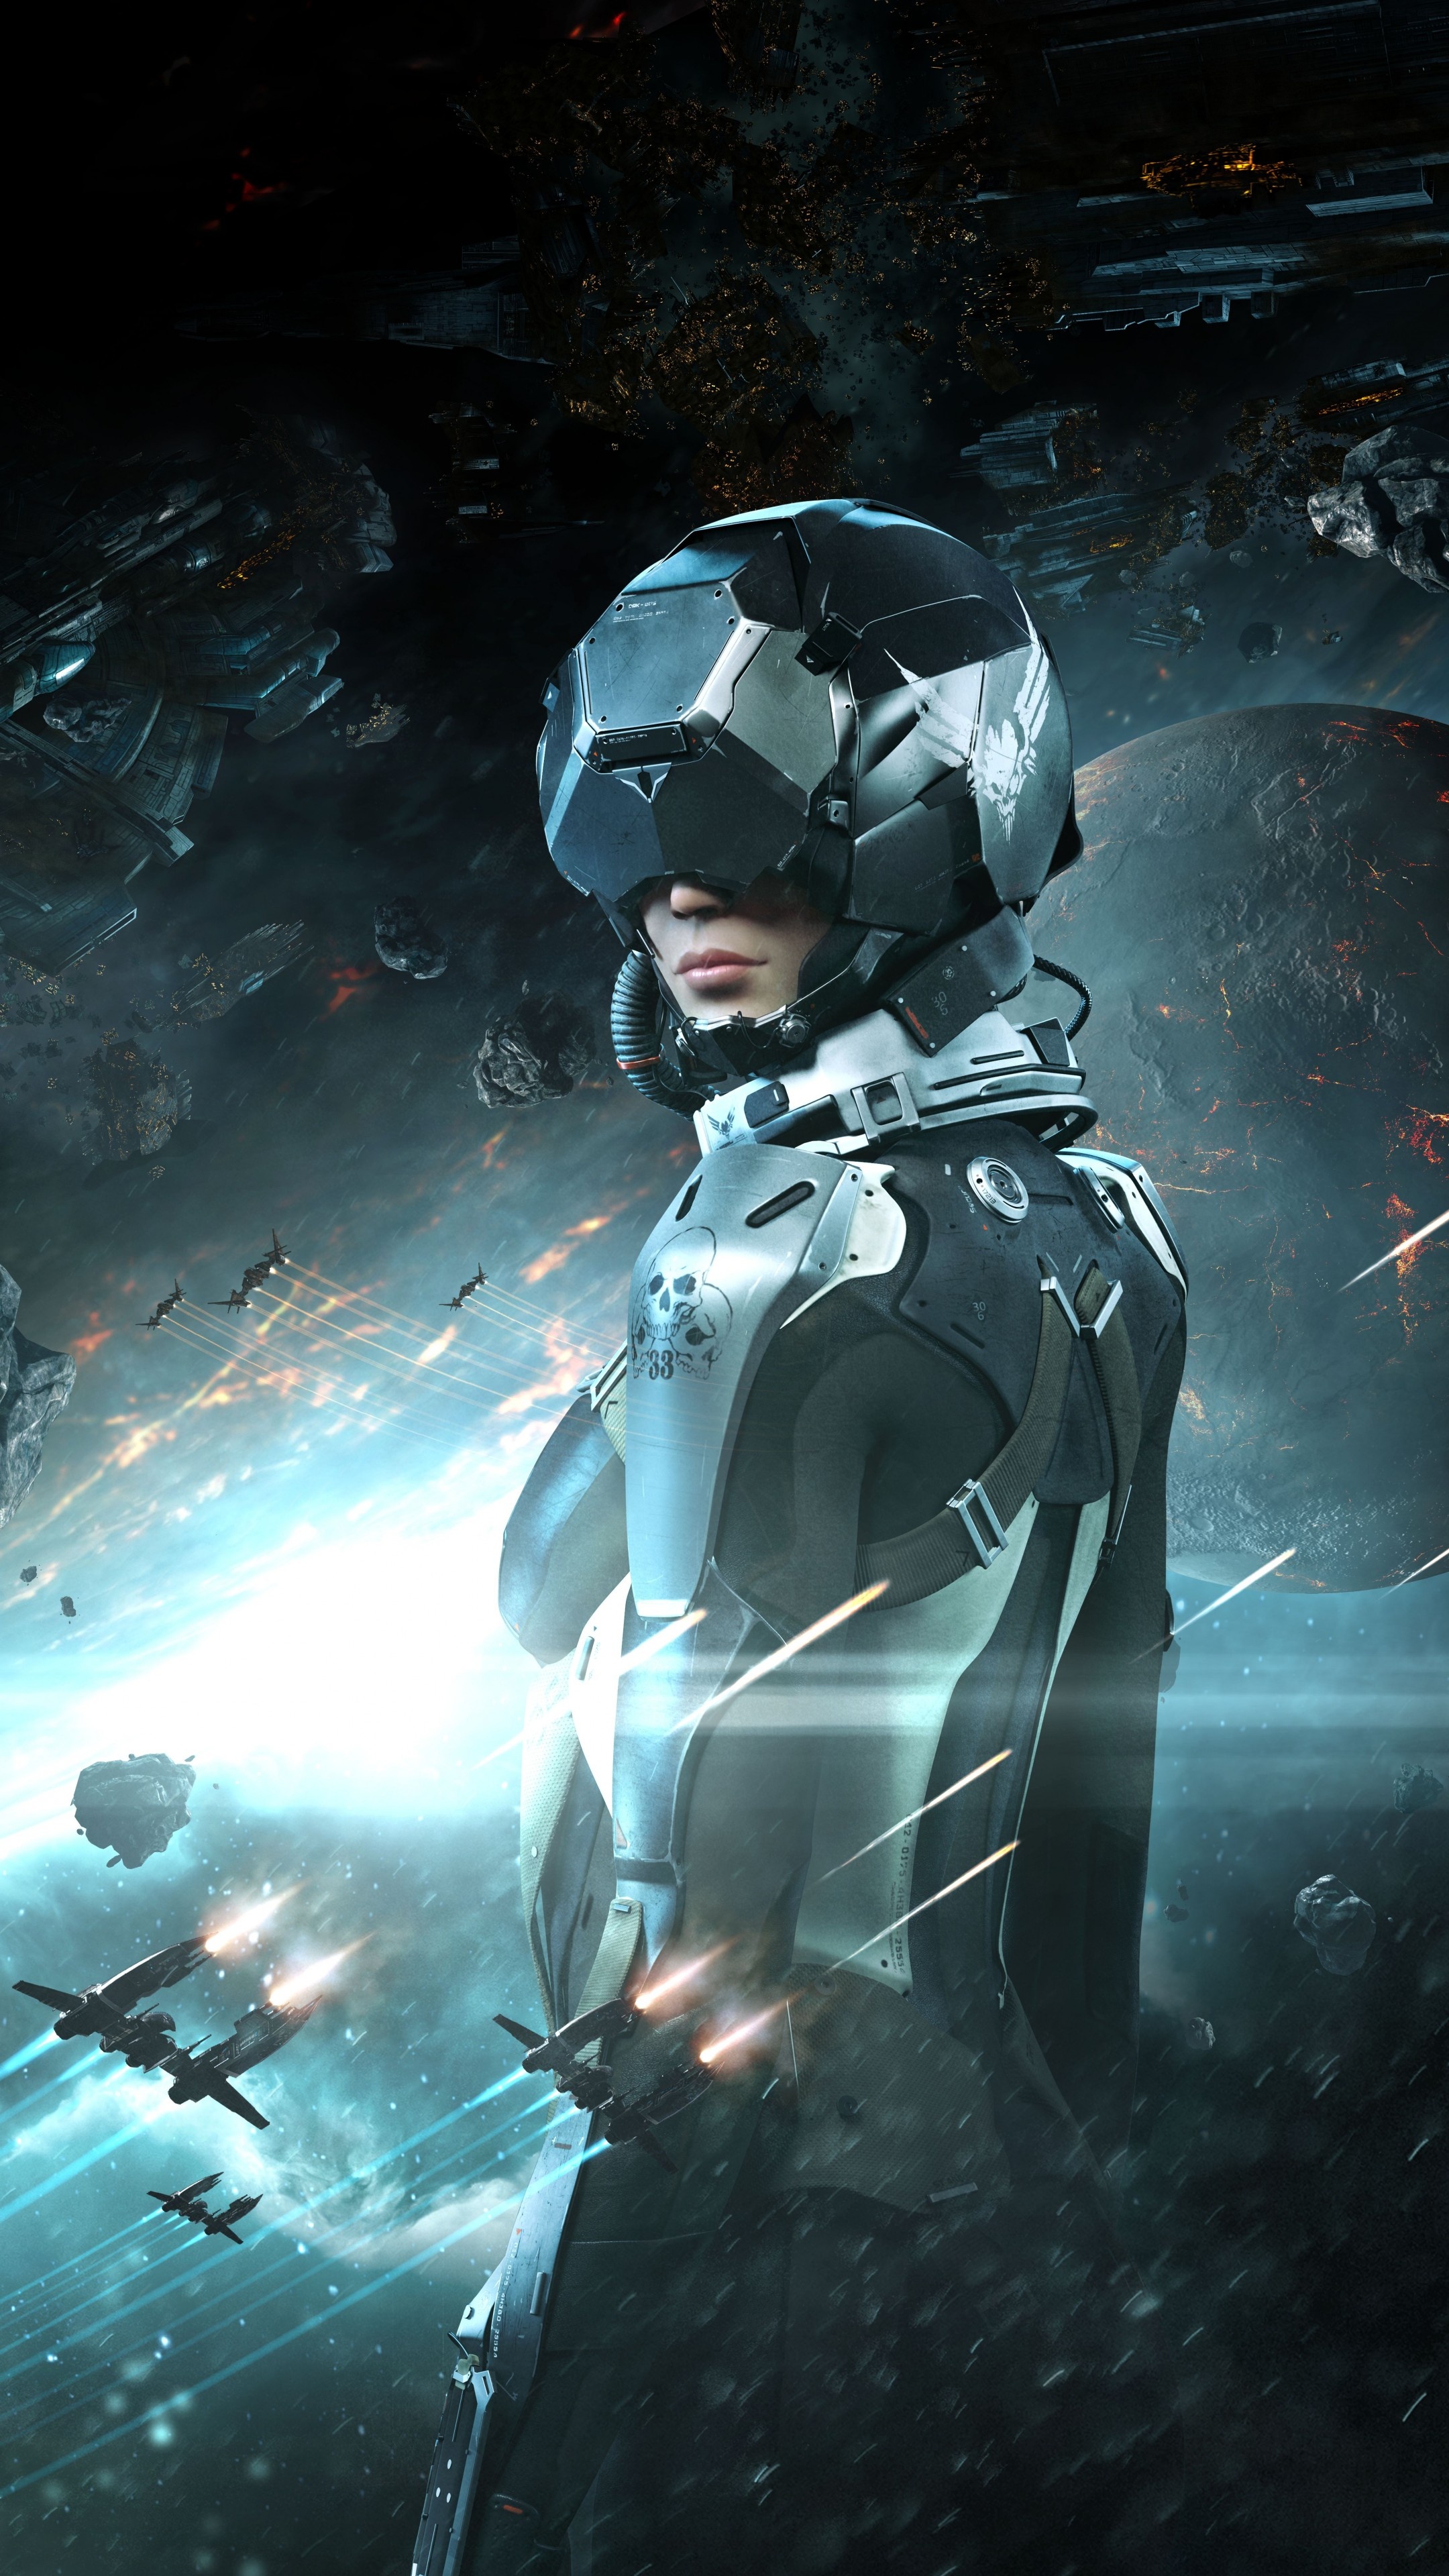 EVE Online, Valkyrie game, Space sci-fi, Best games, 2160x3840 4K Handy